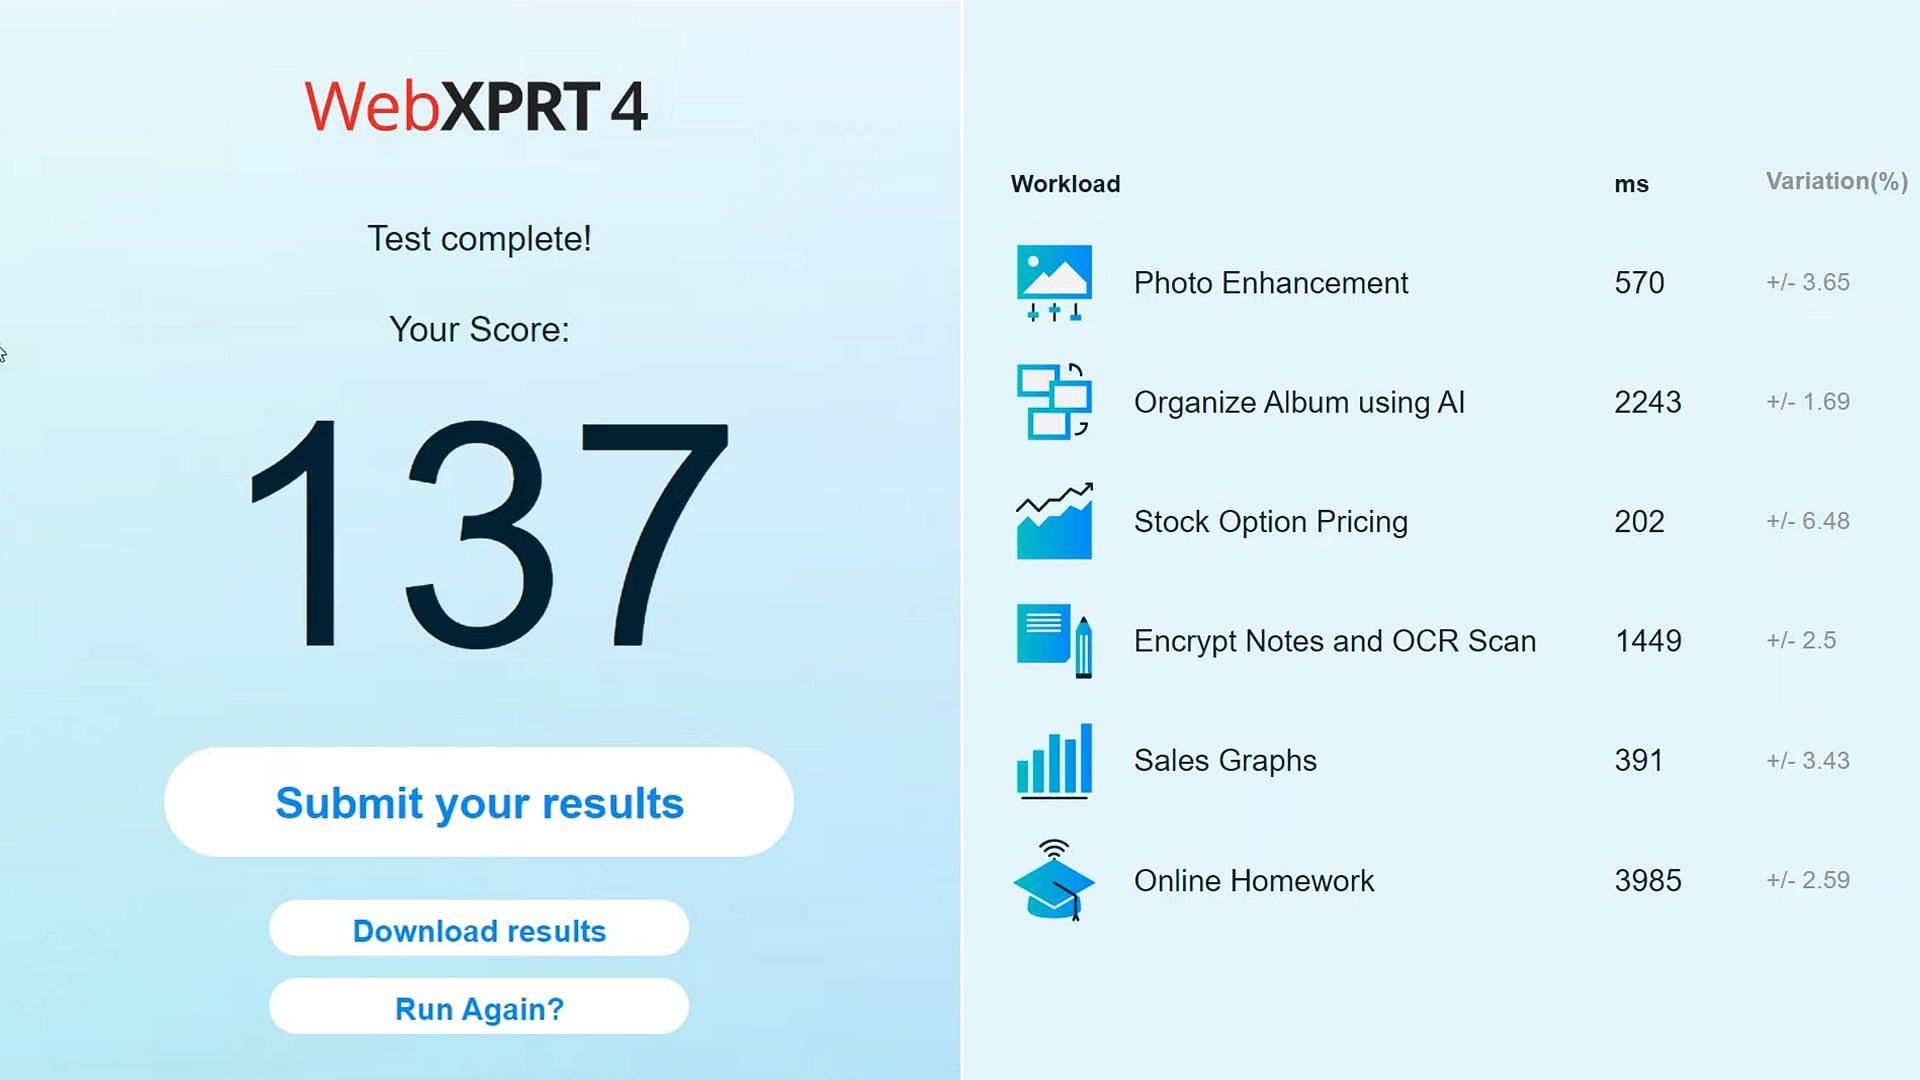 Microsoft Edge scored a total of 137 points (Image via WebXPRT)